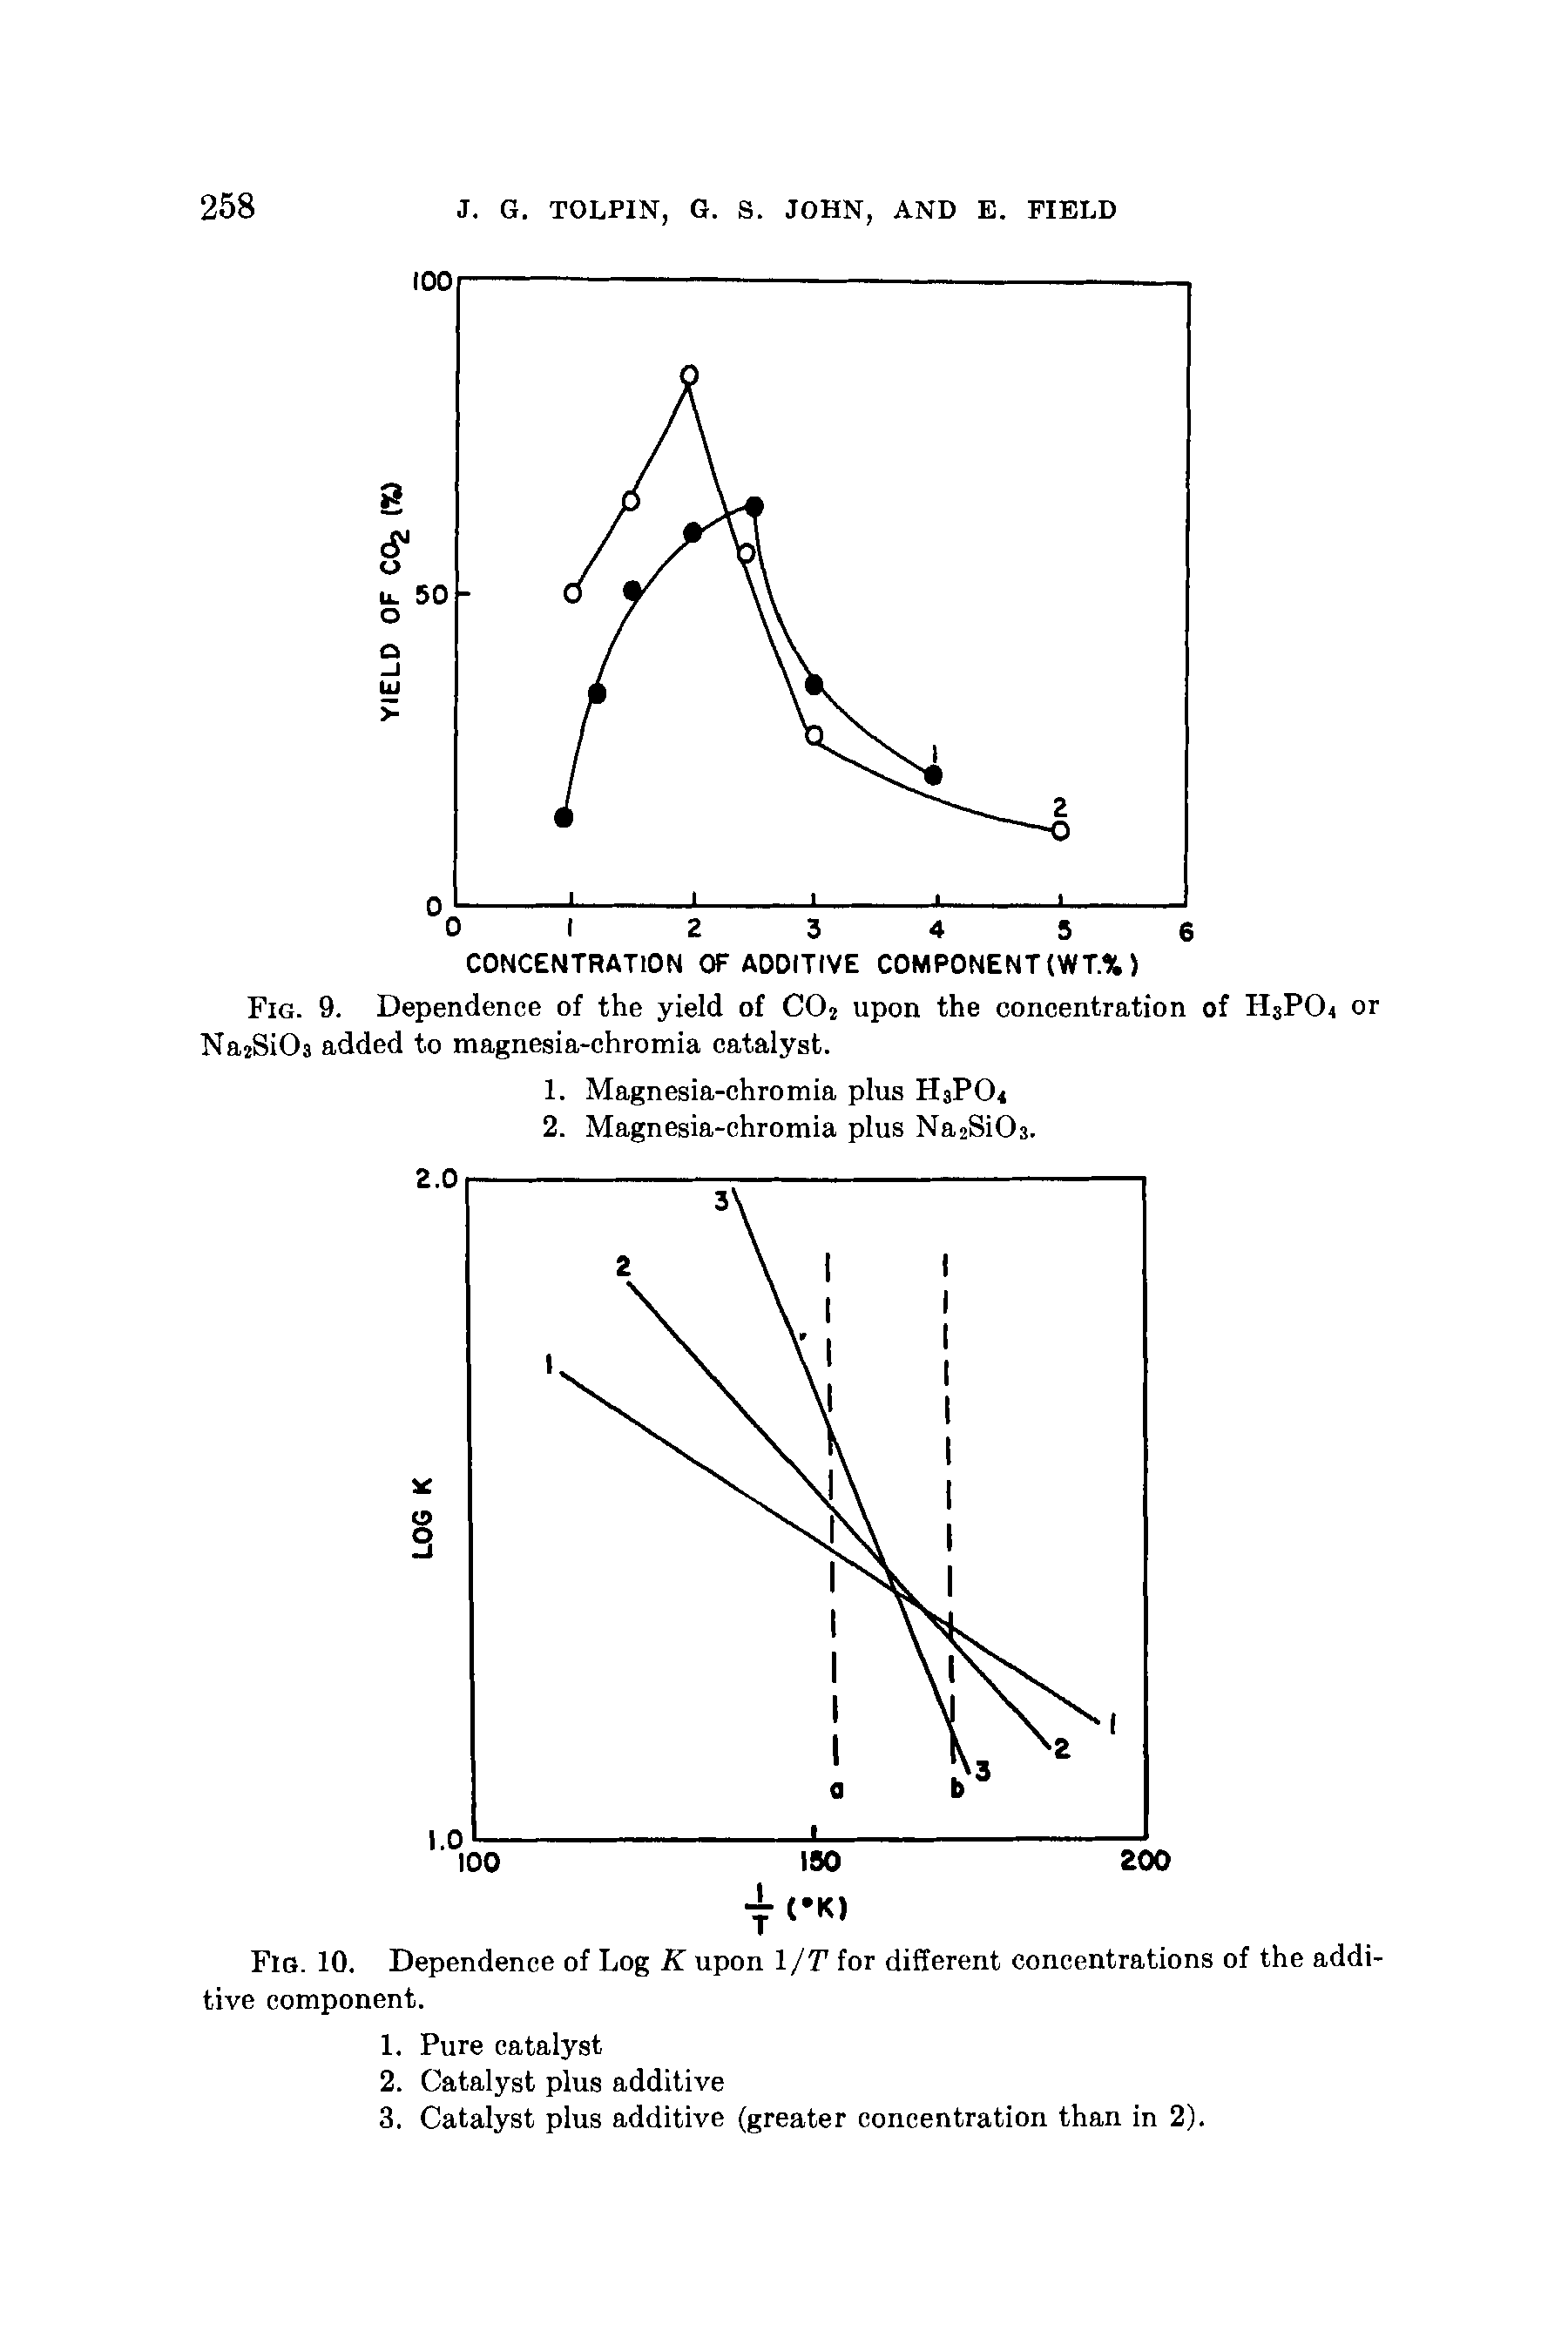 Fig. 9. Dependence of the yield of C02 upon the concentration of H3PO4 or NajSiOa added to magnesia-chromia catalyst.